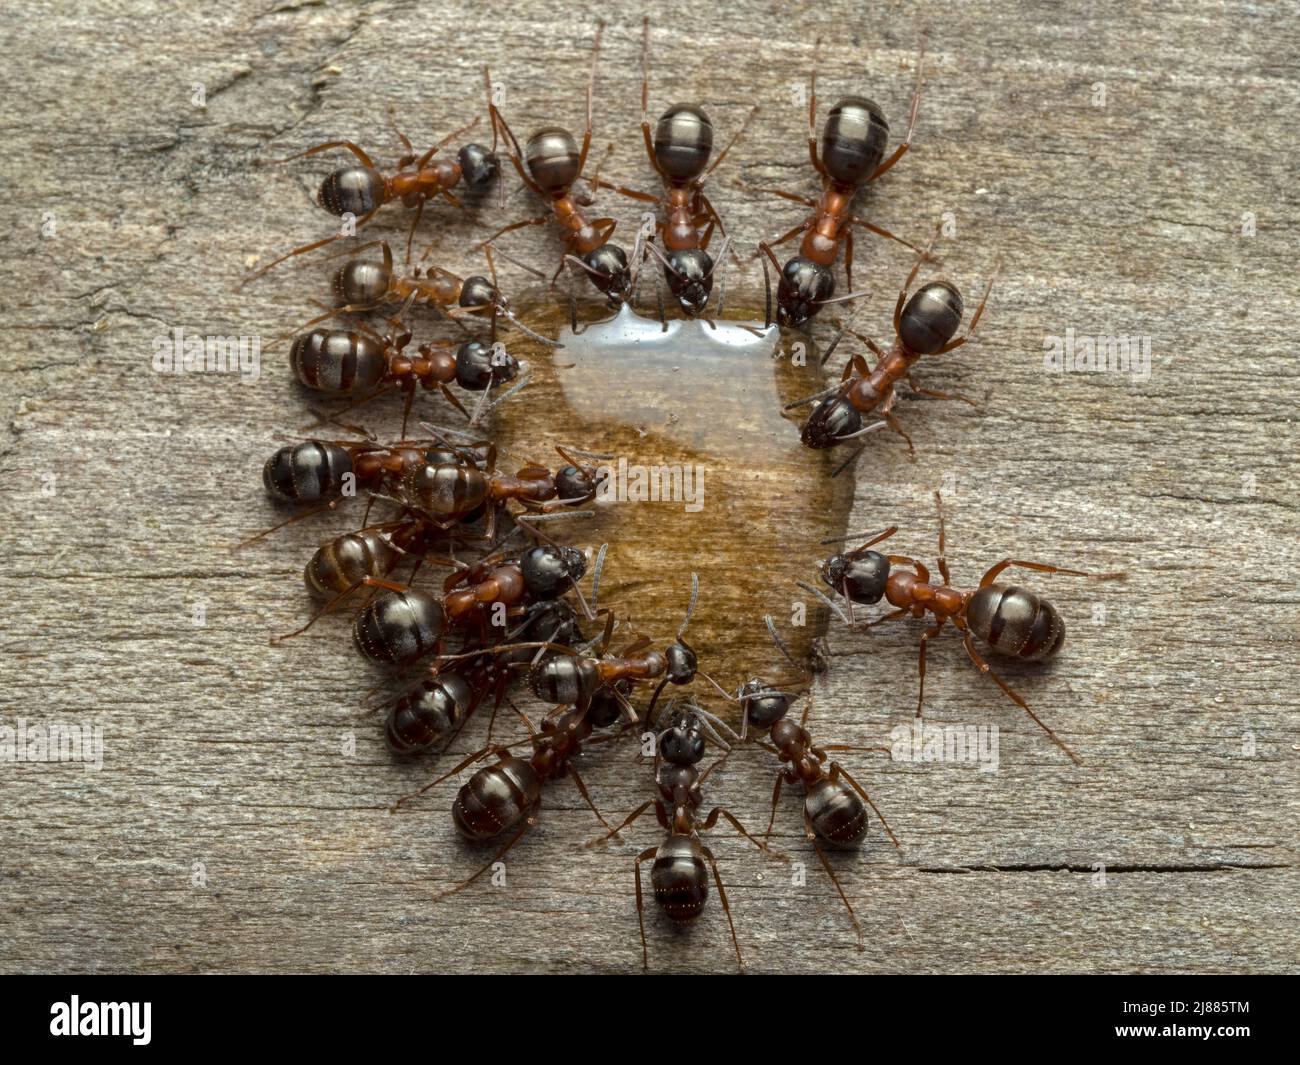 a group of 17 carpenter ants, Camponotus vicinus, surrounding and drinking from a drop of honey Stock Photo